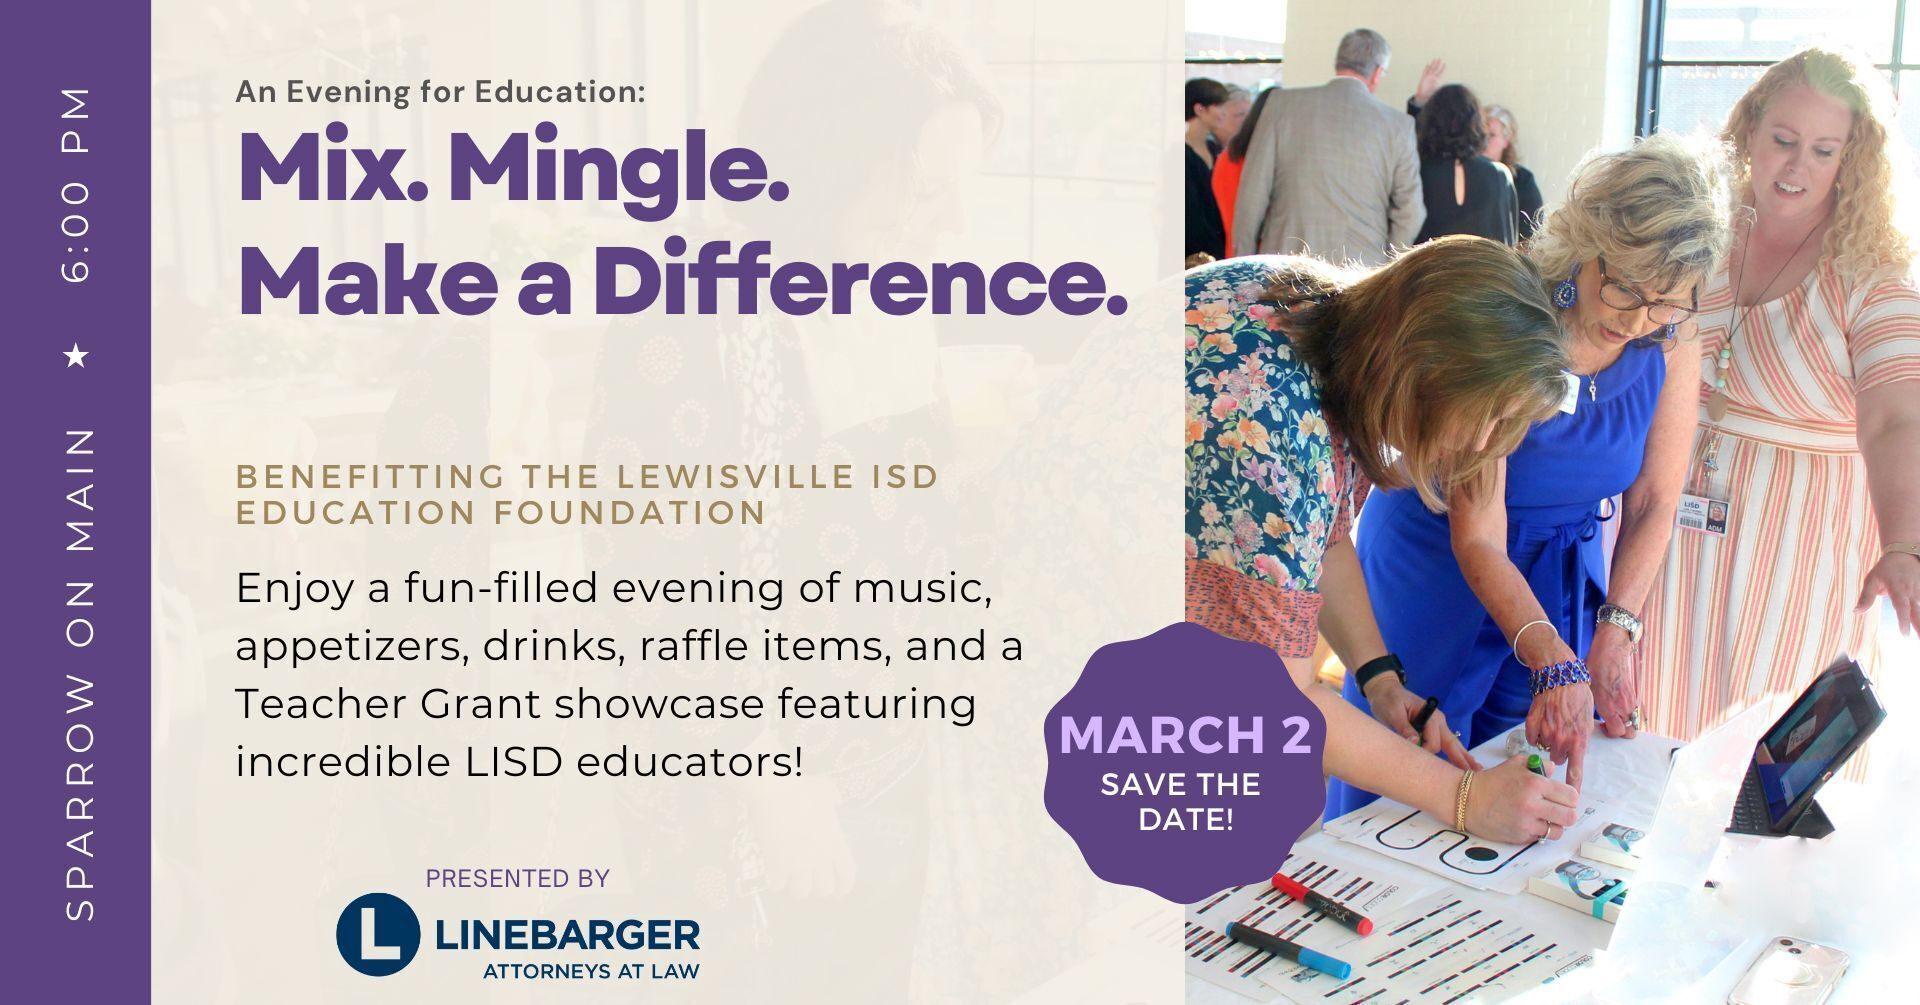 Save the date for March 2nd when the Lewisville ISD Education Foundation will host An Evening For Education!